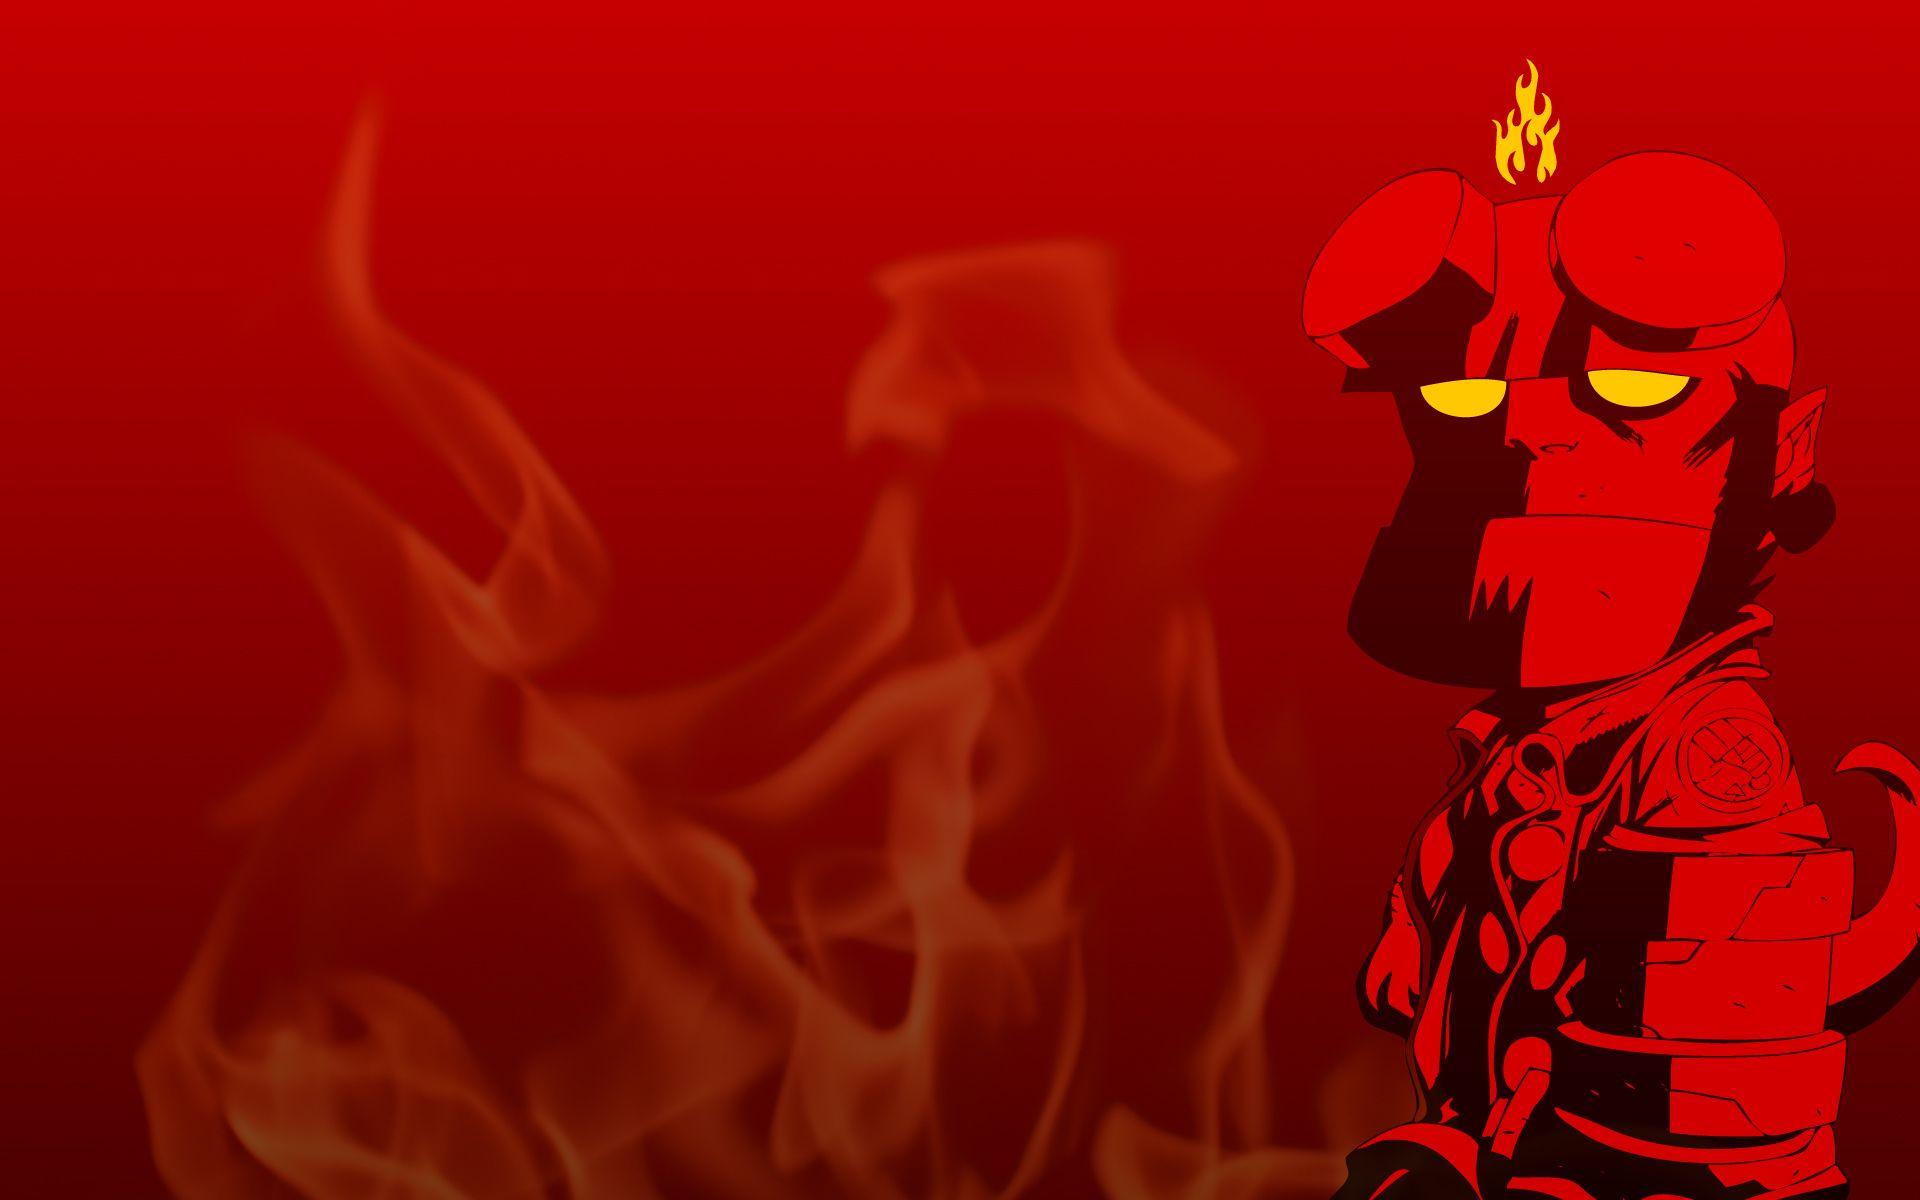 Wallpaper Blink of Hellboy Wallpaper HD for Android, Windows